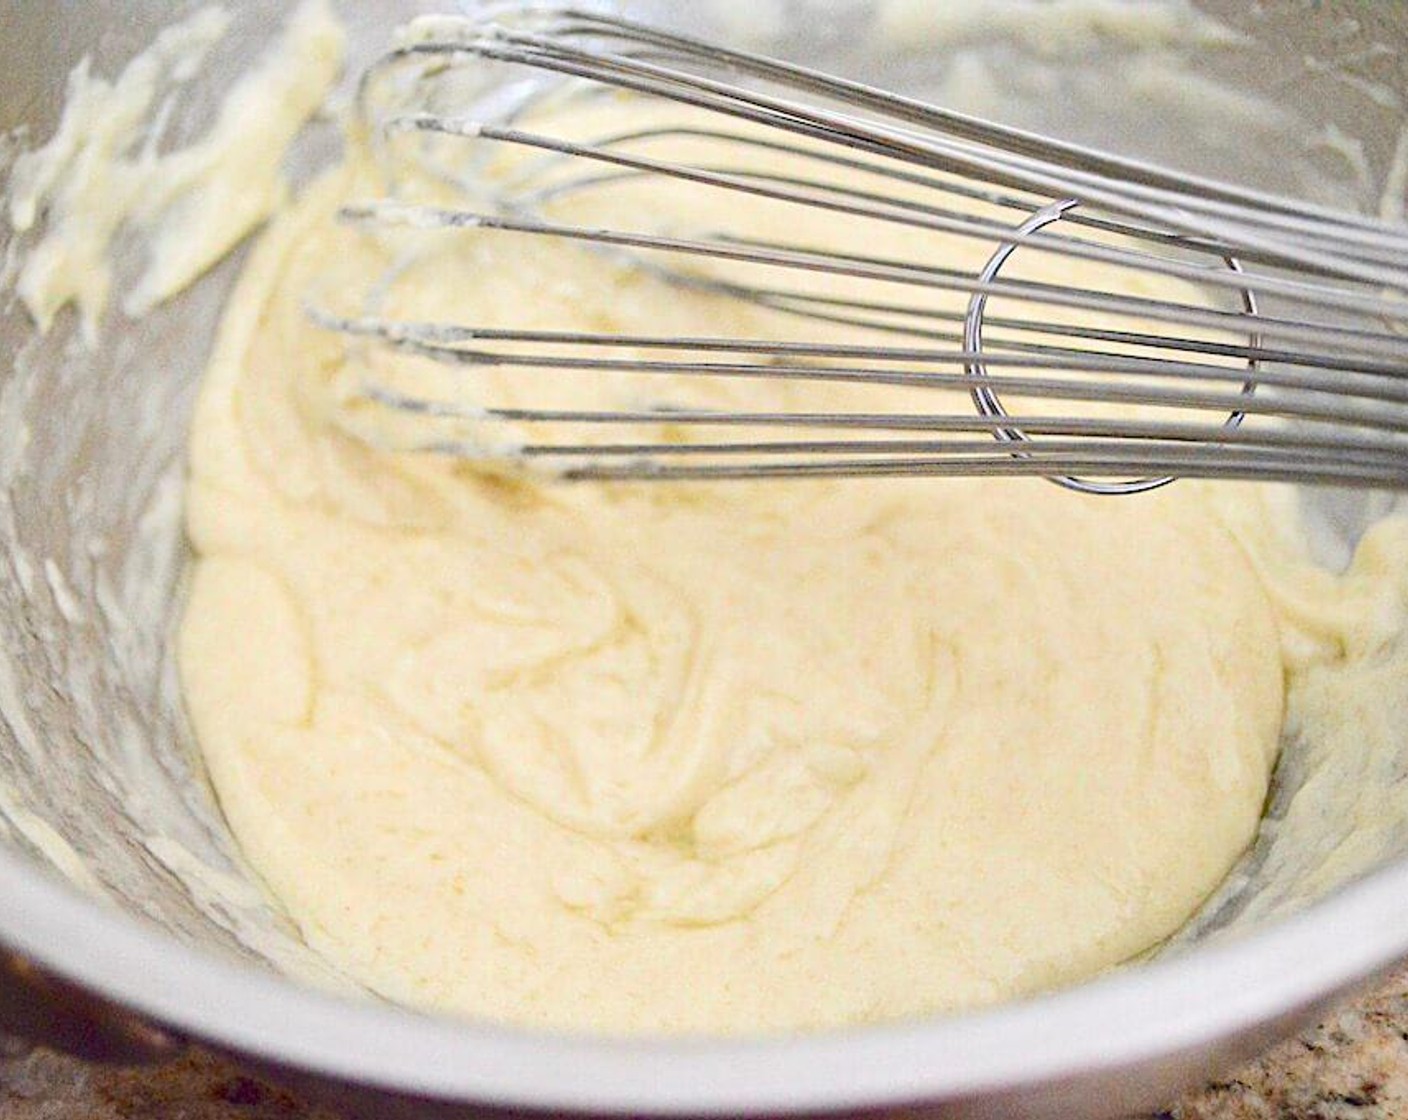 step 2 Slowly pour in the Heavy Cream (3/4 cup) until it is a uniform sauce. Then whisk in the Dijon Mustard (1 Tbsp), Salt (1 pinch) and McCormick® Garlic Powder (1 pinch).